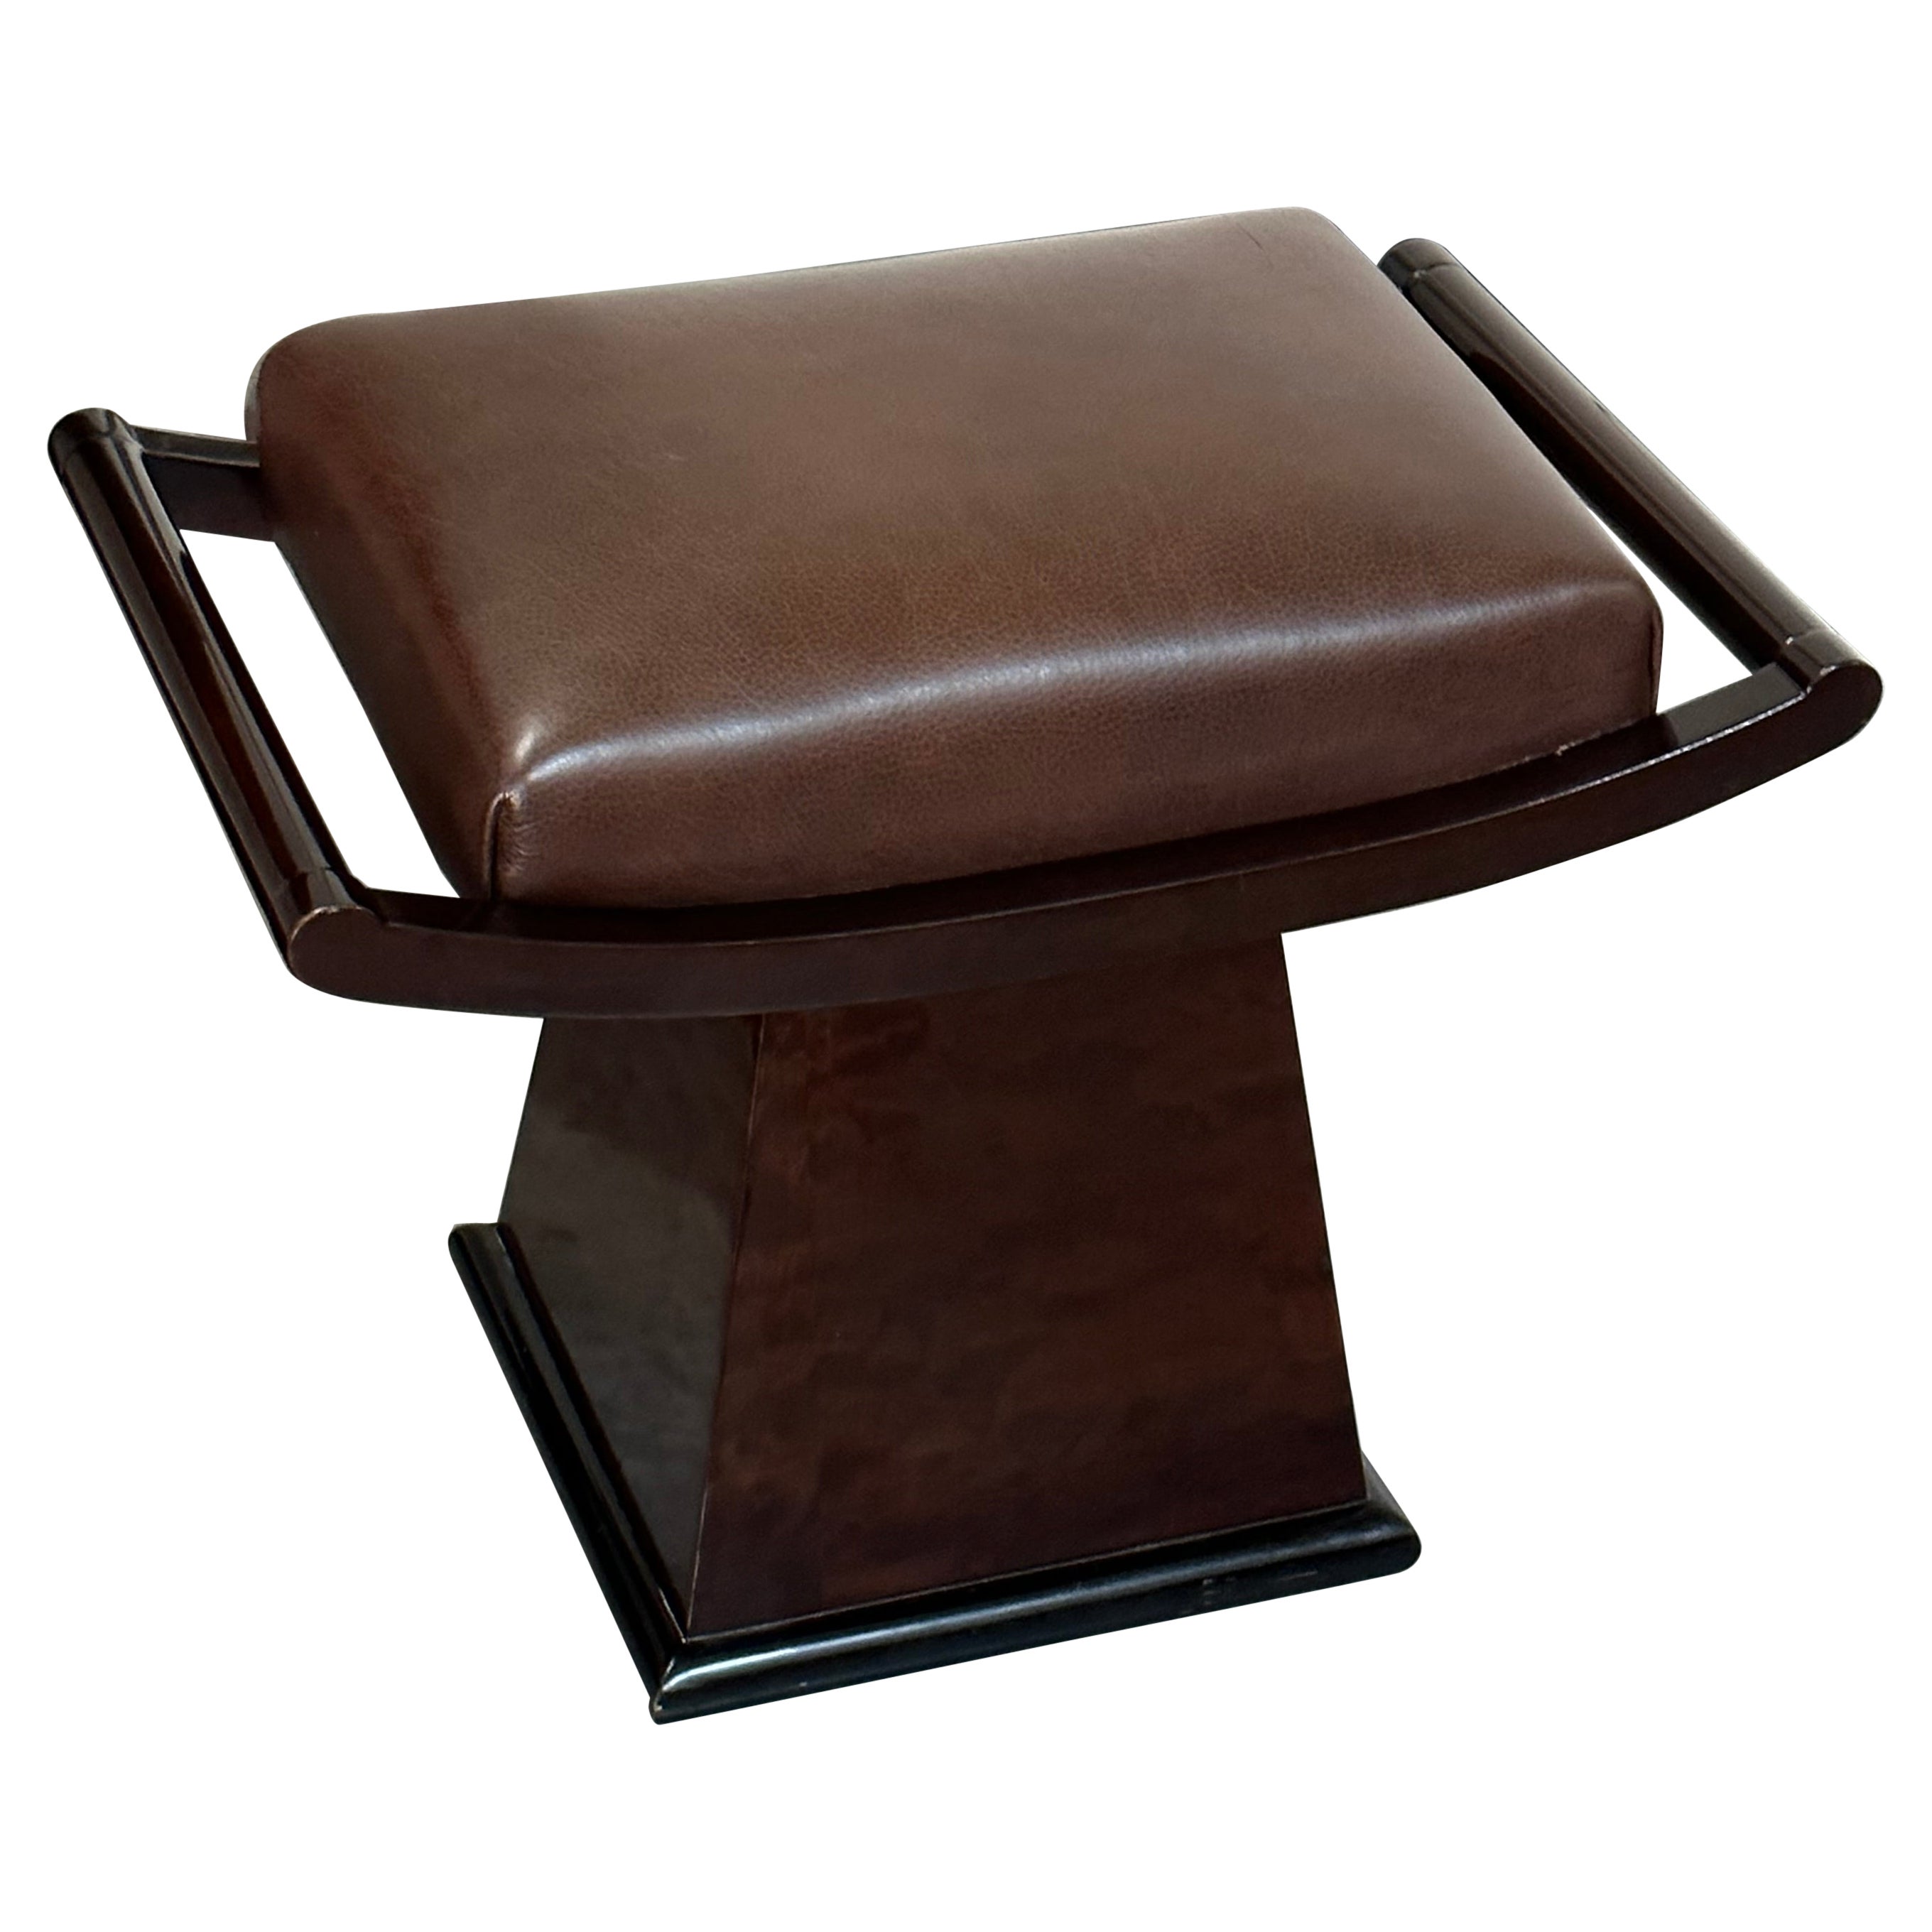 Art Deco Stool, Material Wood and leather, Country France, 1930 For Sale